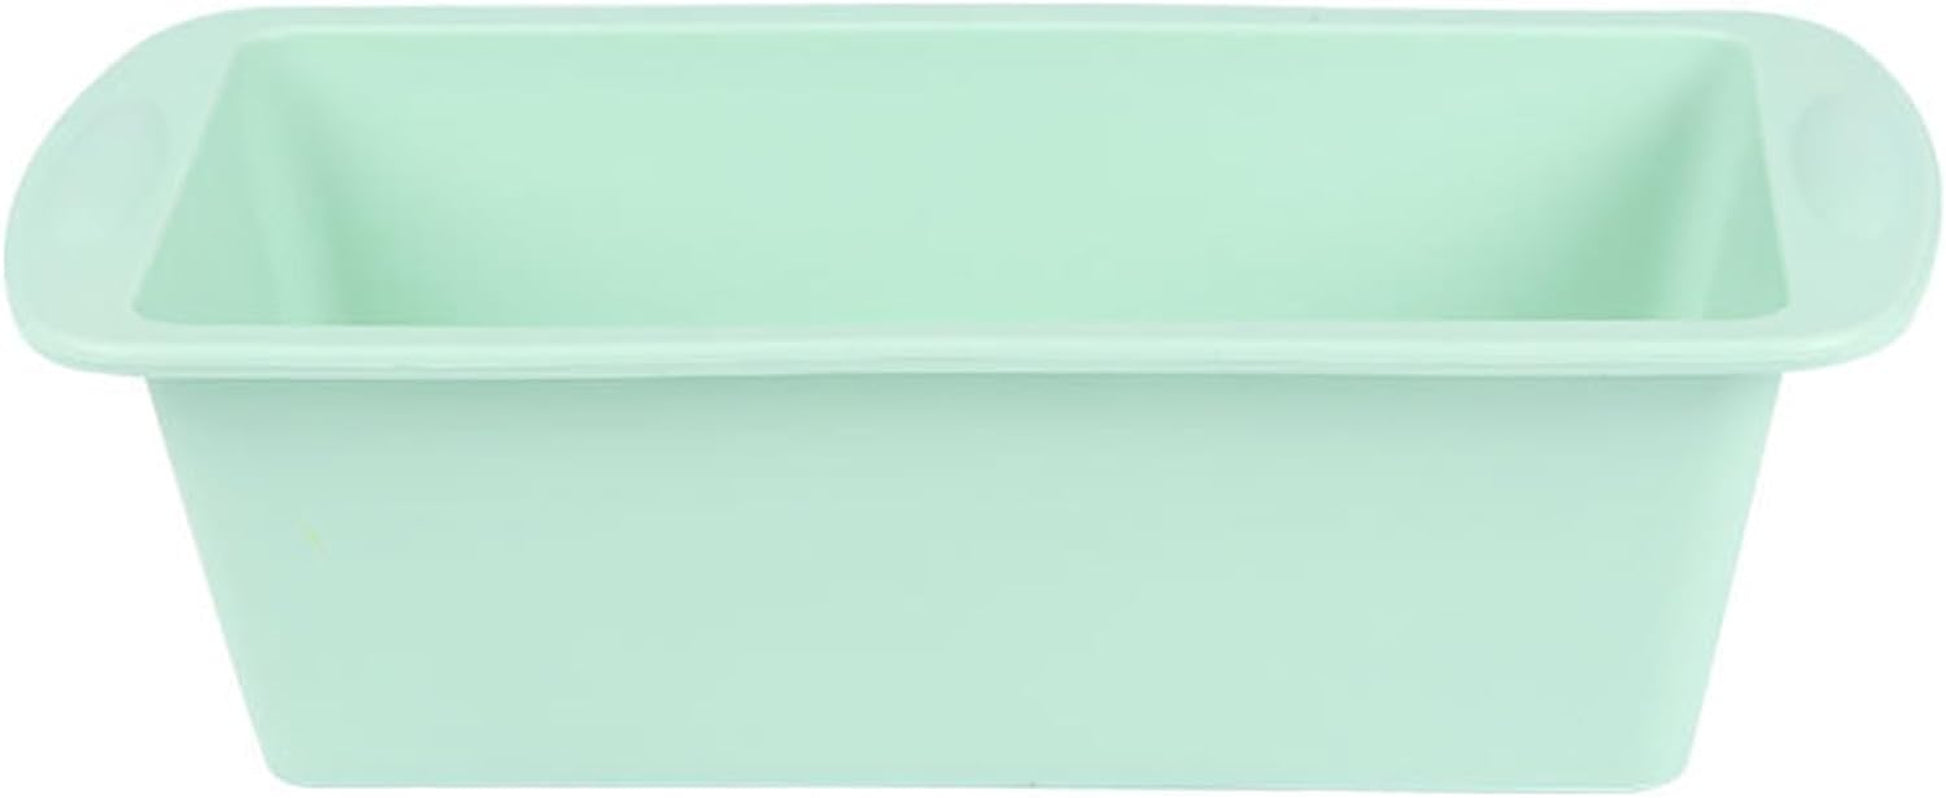 Long Loaf Cake Mold Silicone Baking Mold Nonstick Silicone Bread Loaf Pan with Handles Oven Safe Easy Release Heat-Resistant Light Purple  fxwtich Green  